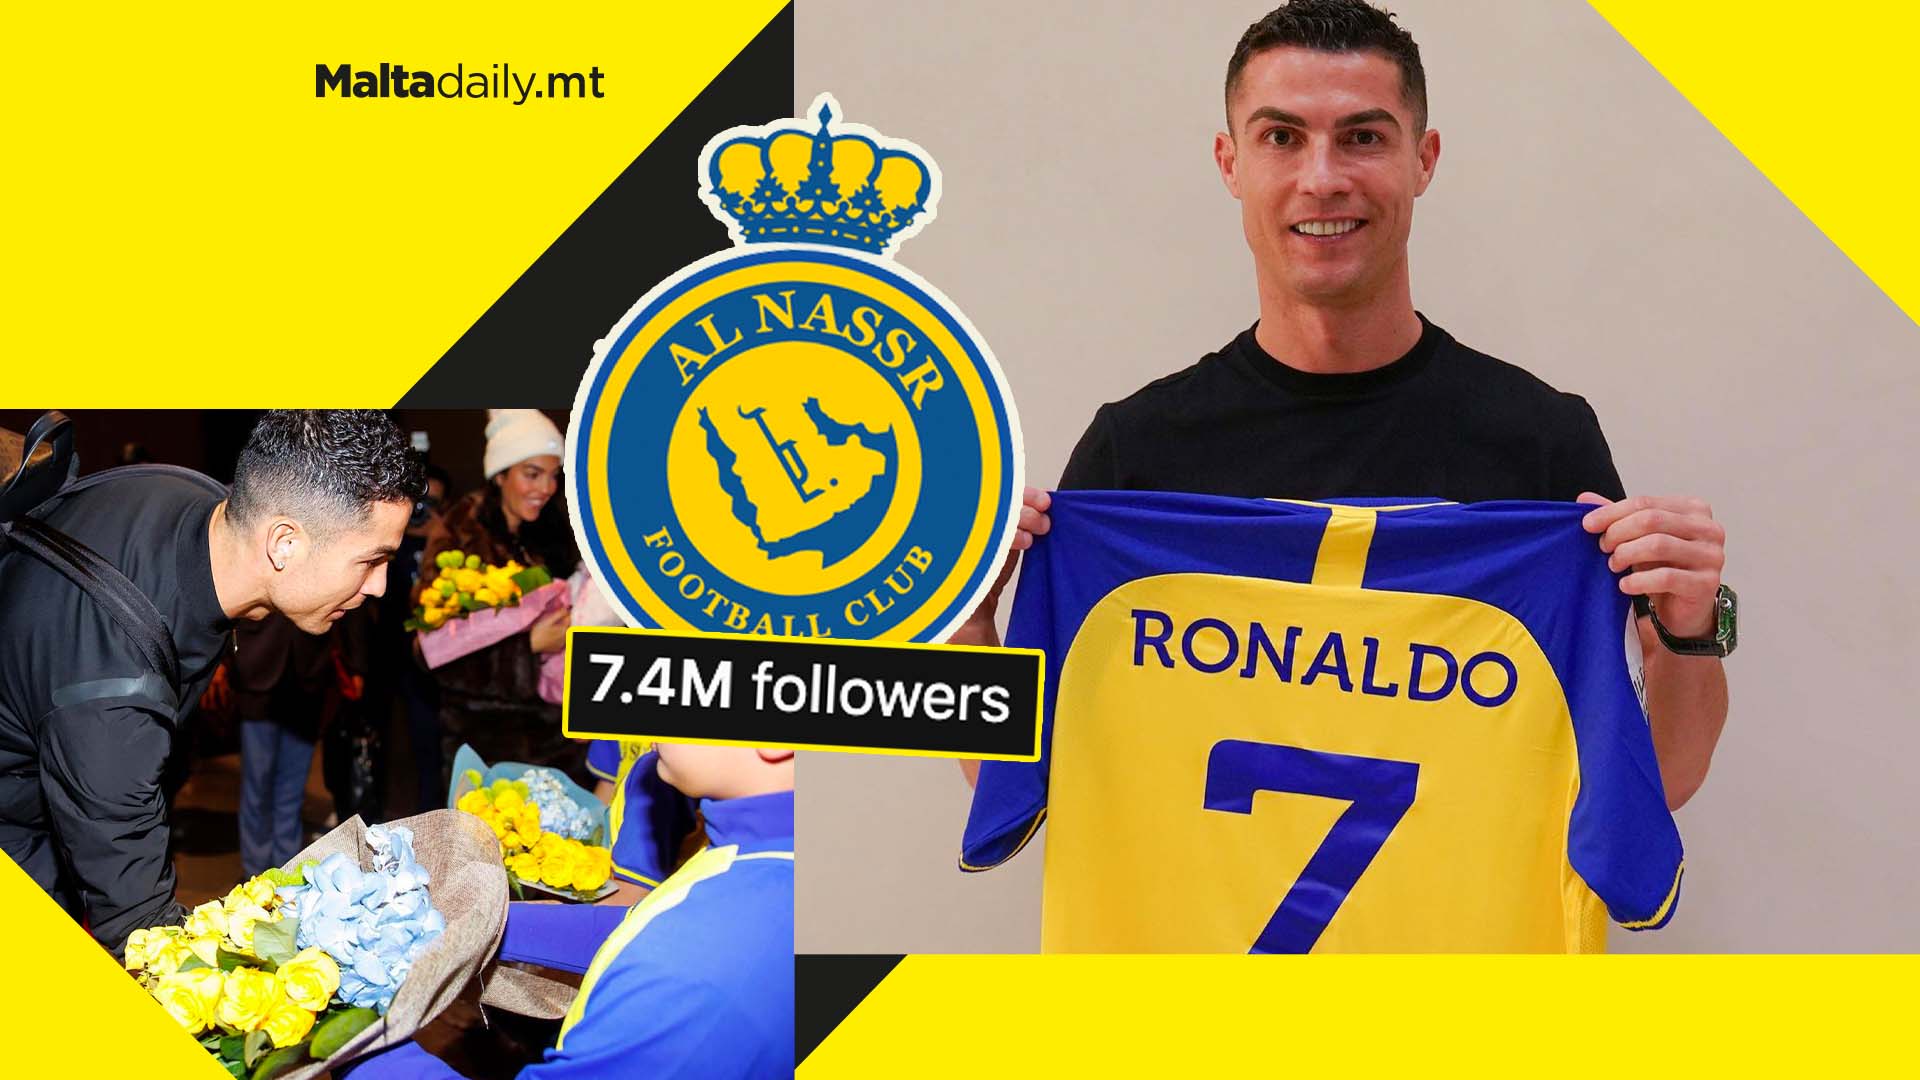 6.5 million increase in followers for Al Nassr after Ronaldo joins